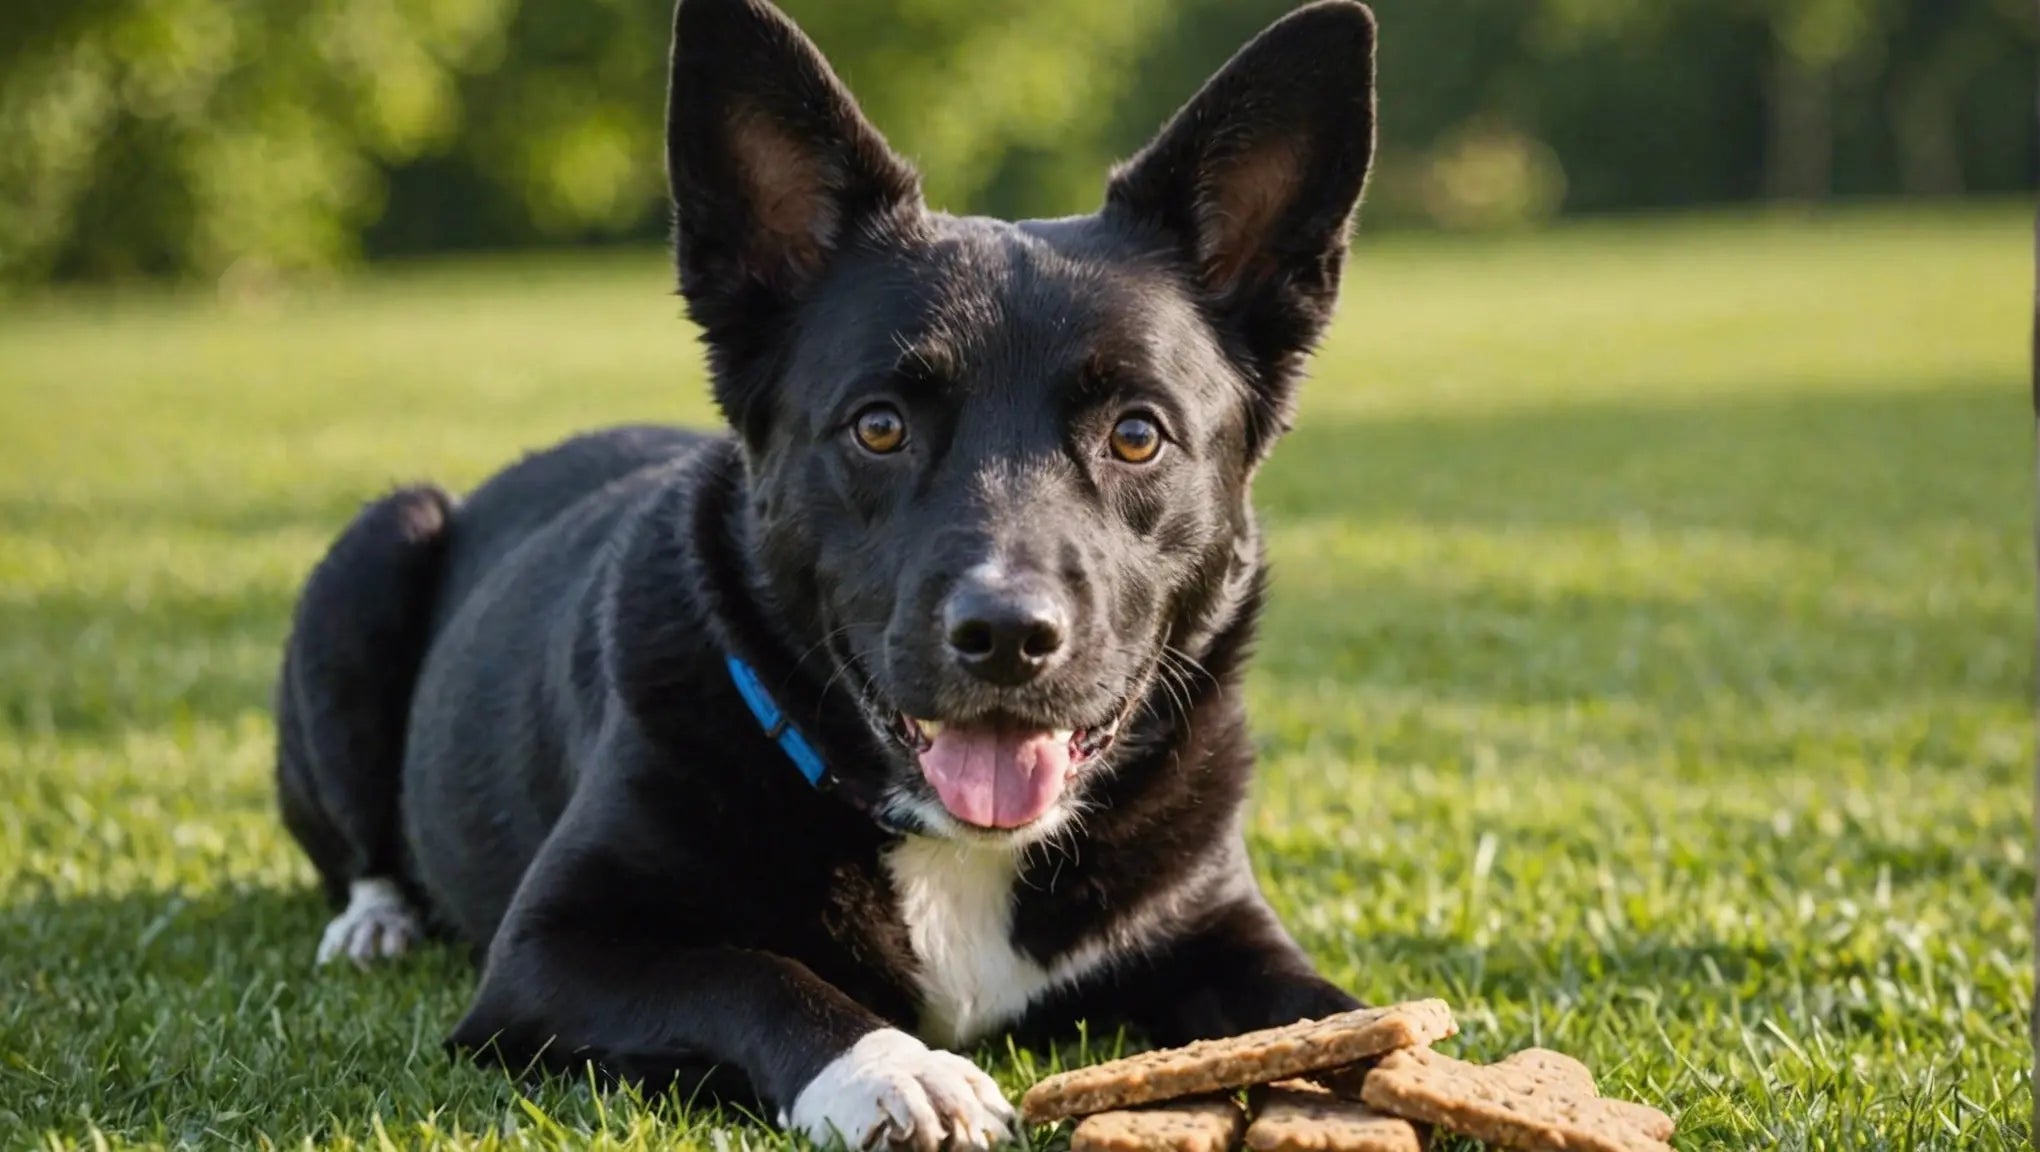 10 Tasty Dog Biscuits Your Pup Will Love